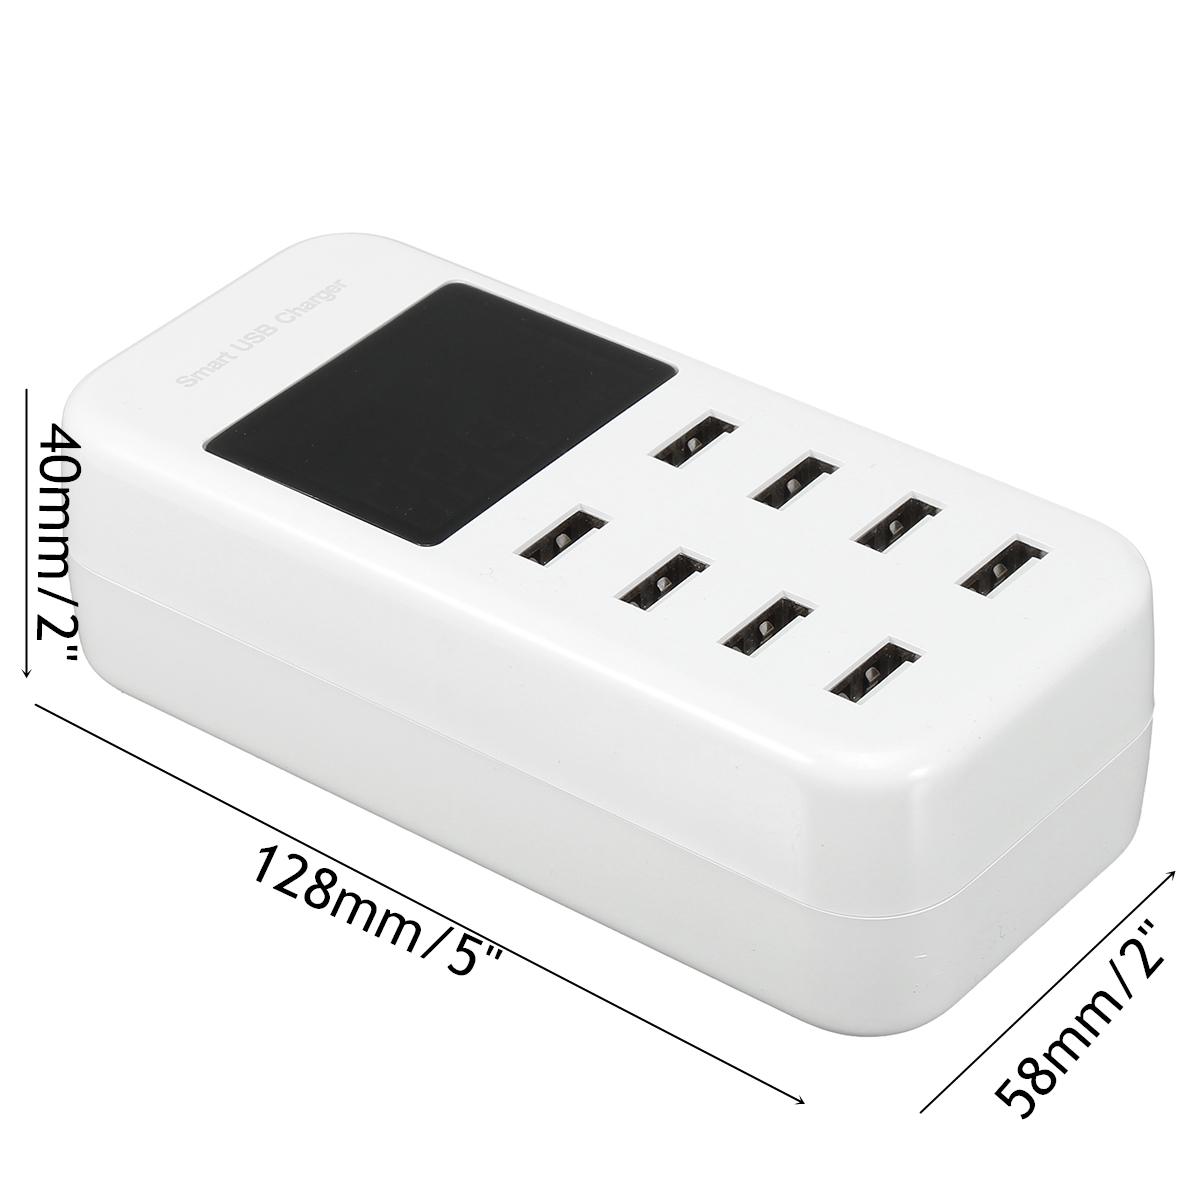 LED-Multi-USB-Charger-8-Port-Smart-Fast-Desktop-Hub-Wall-Charger-Charging-Station-Quick-Charge-Intel-1625277-6